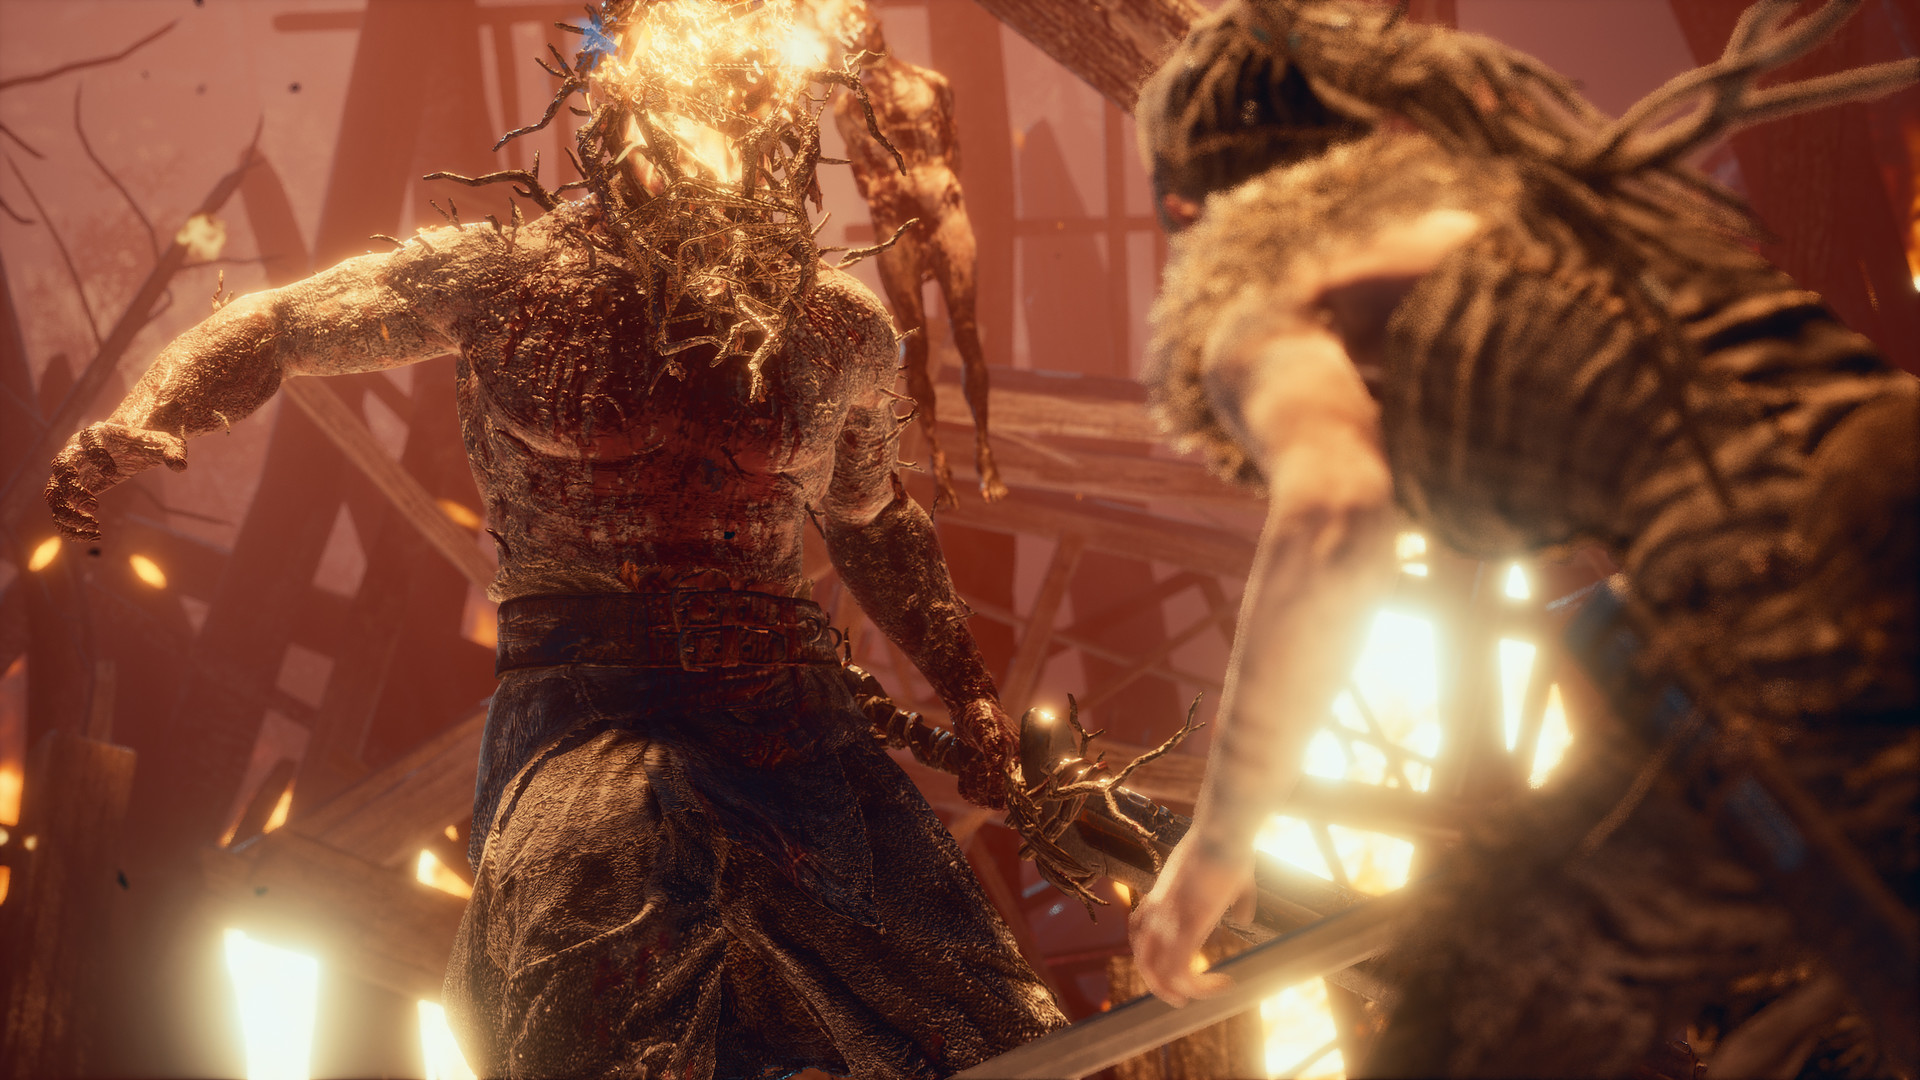 Hellblade: Senua’s Sacrifice (Ps4) Review: Fear Through The Eyes Of Madness 5